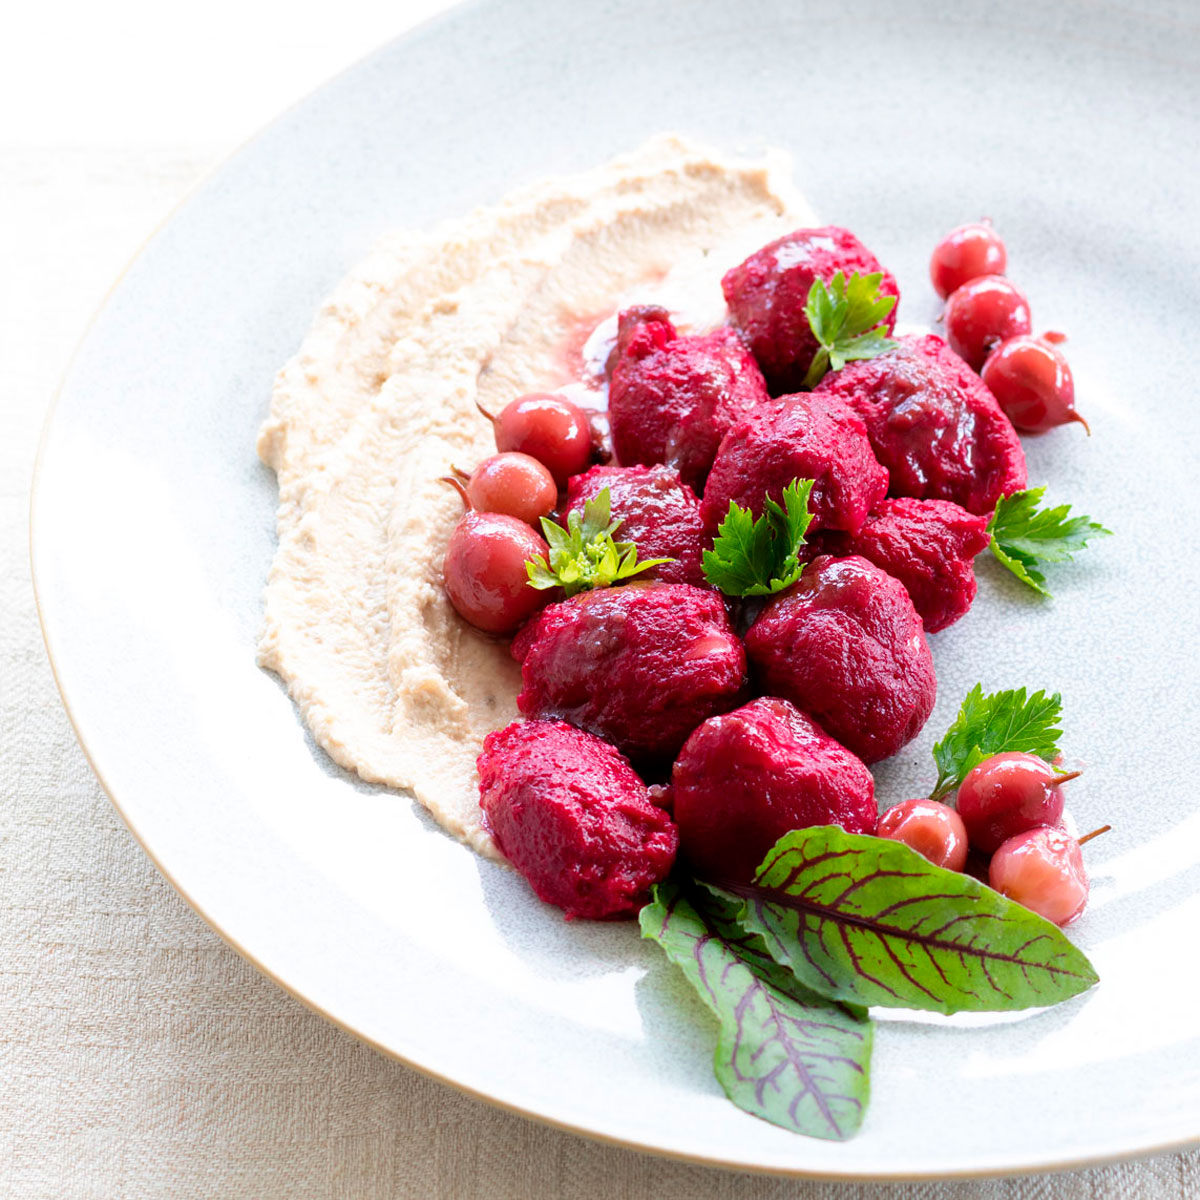 Beetroot ricotta gnocchi with celery cream on a bed of berries